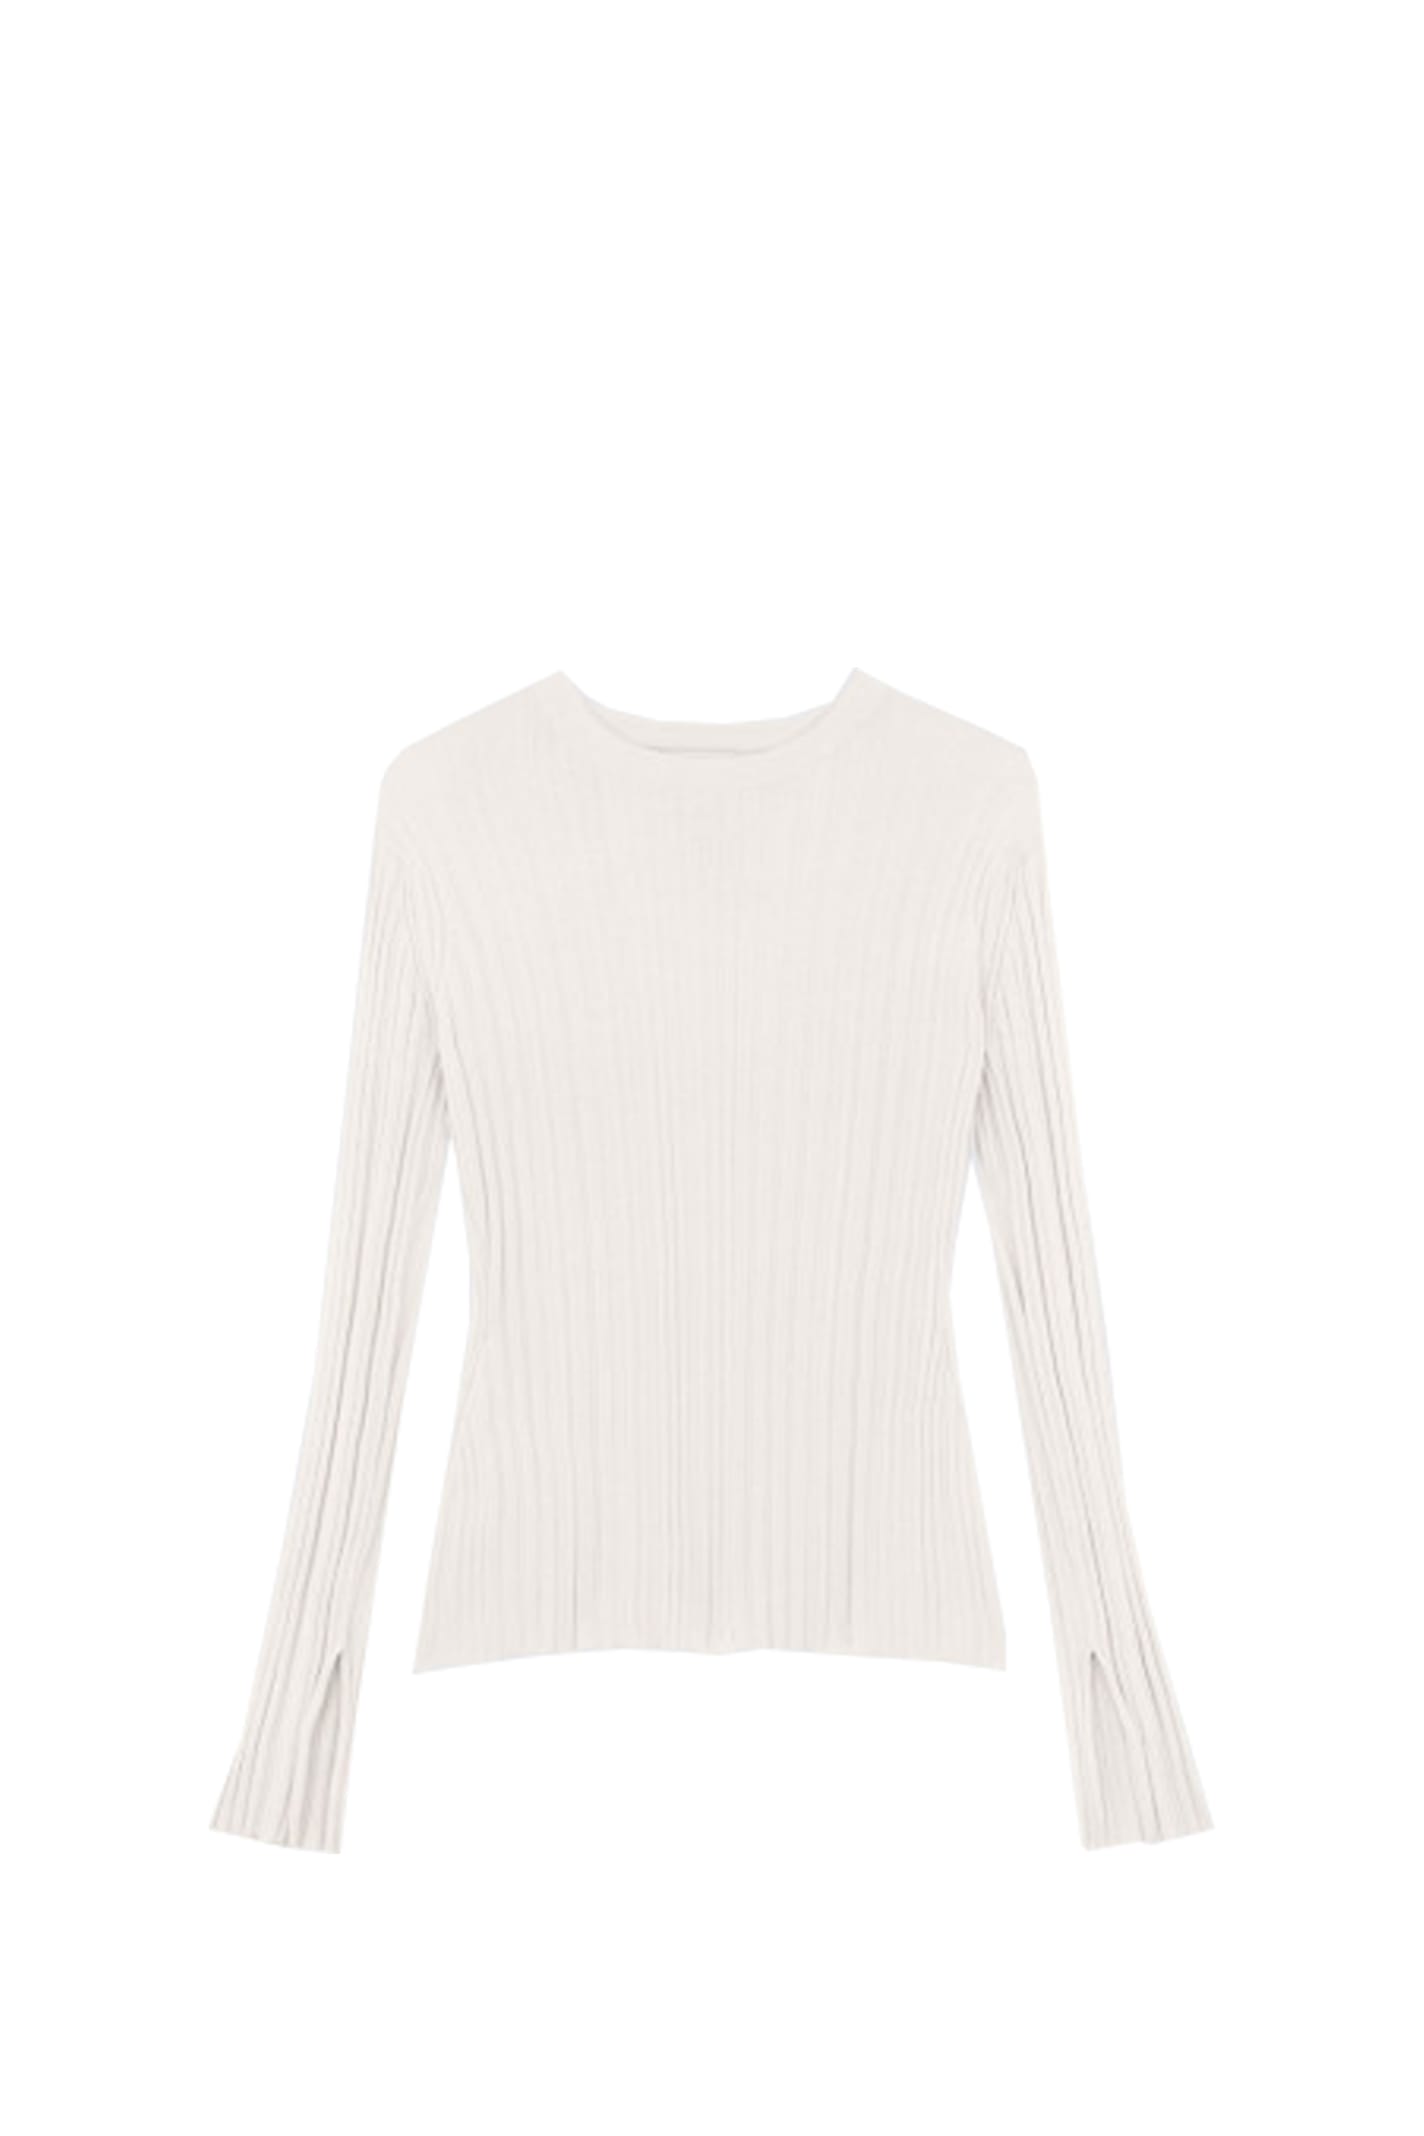 Shop Loulou Studio Evie Top In Ivory